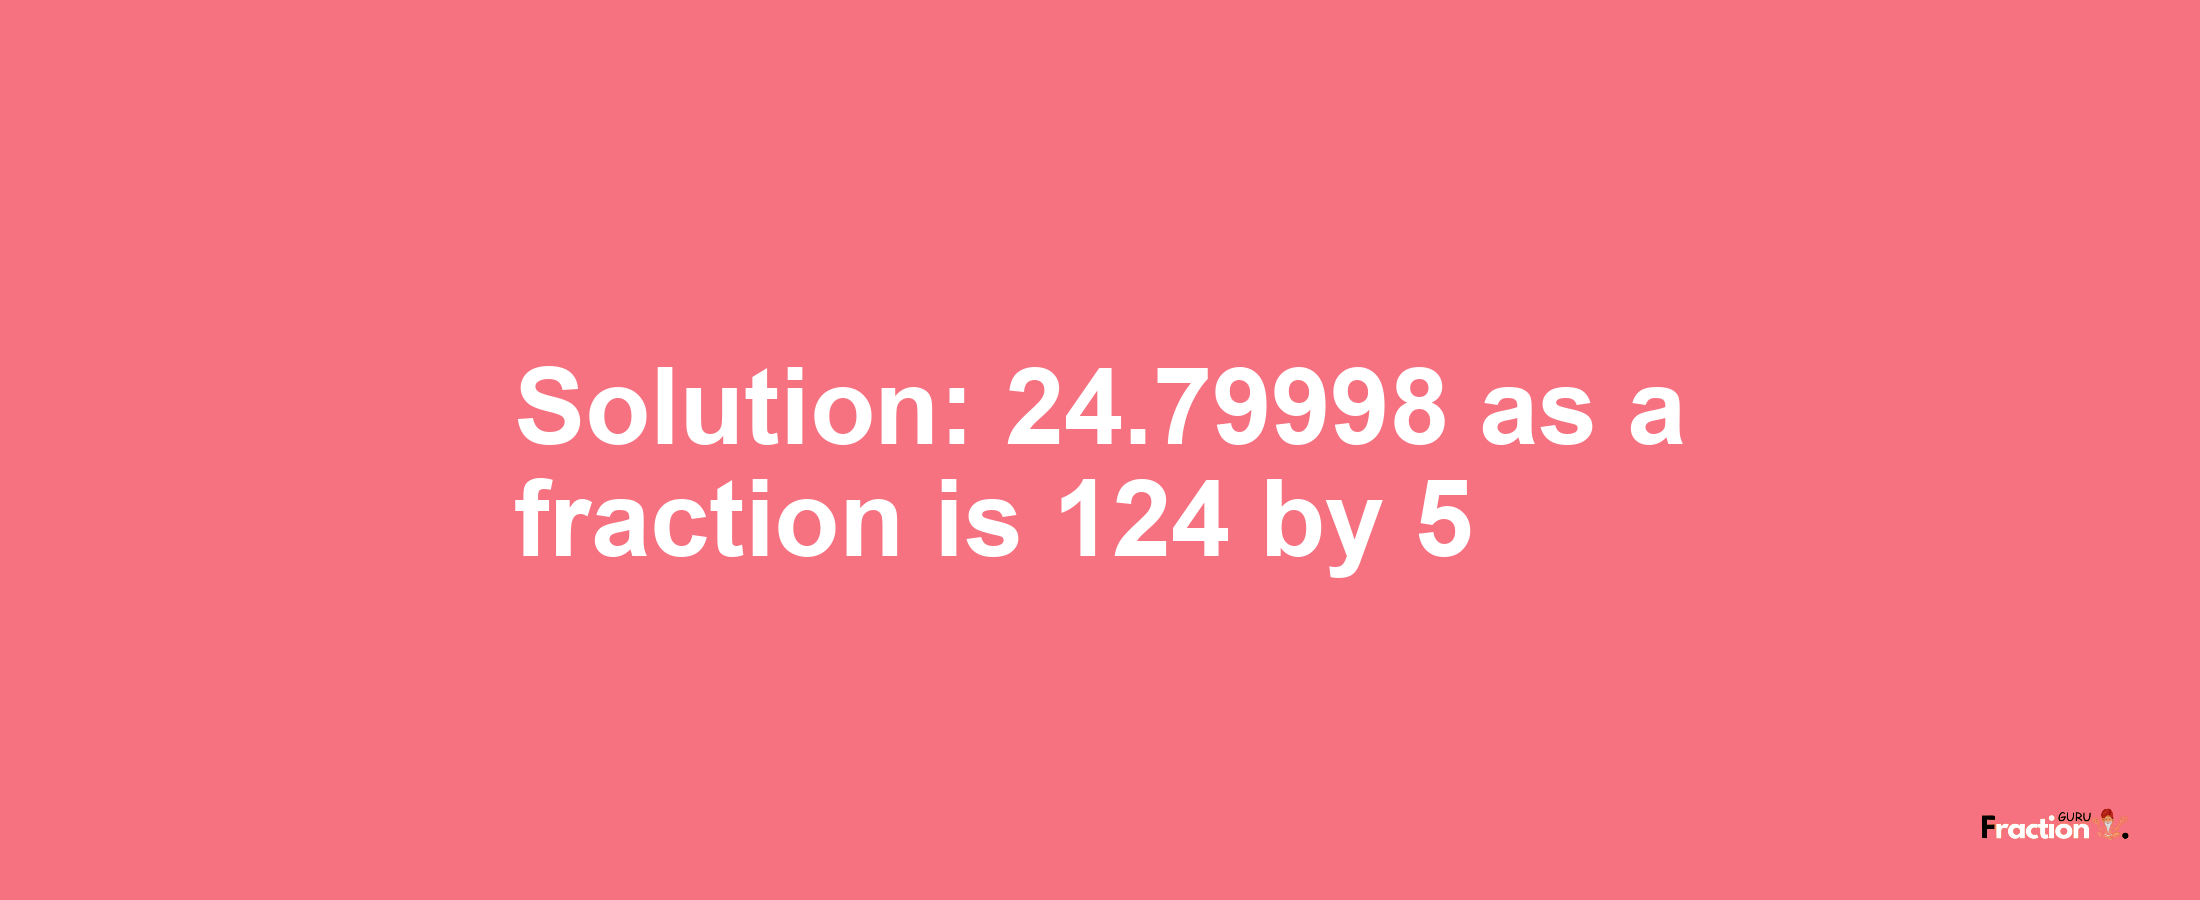 Solution:24.79998 as a fraction is 124/5